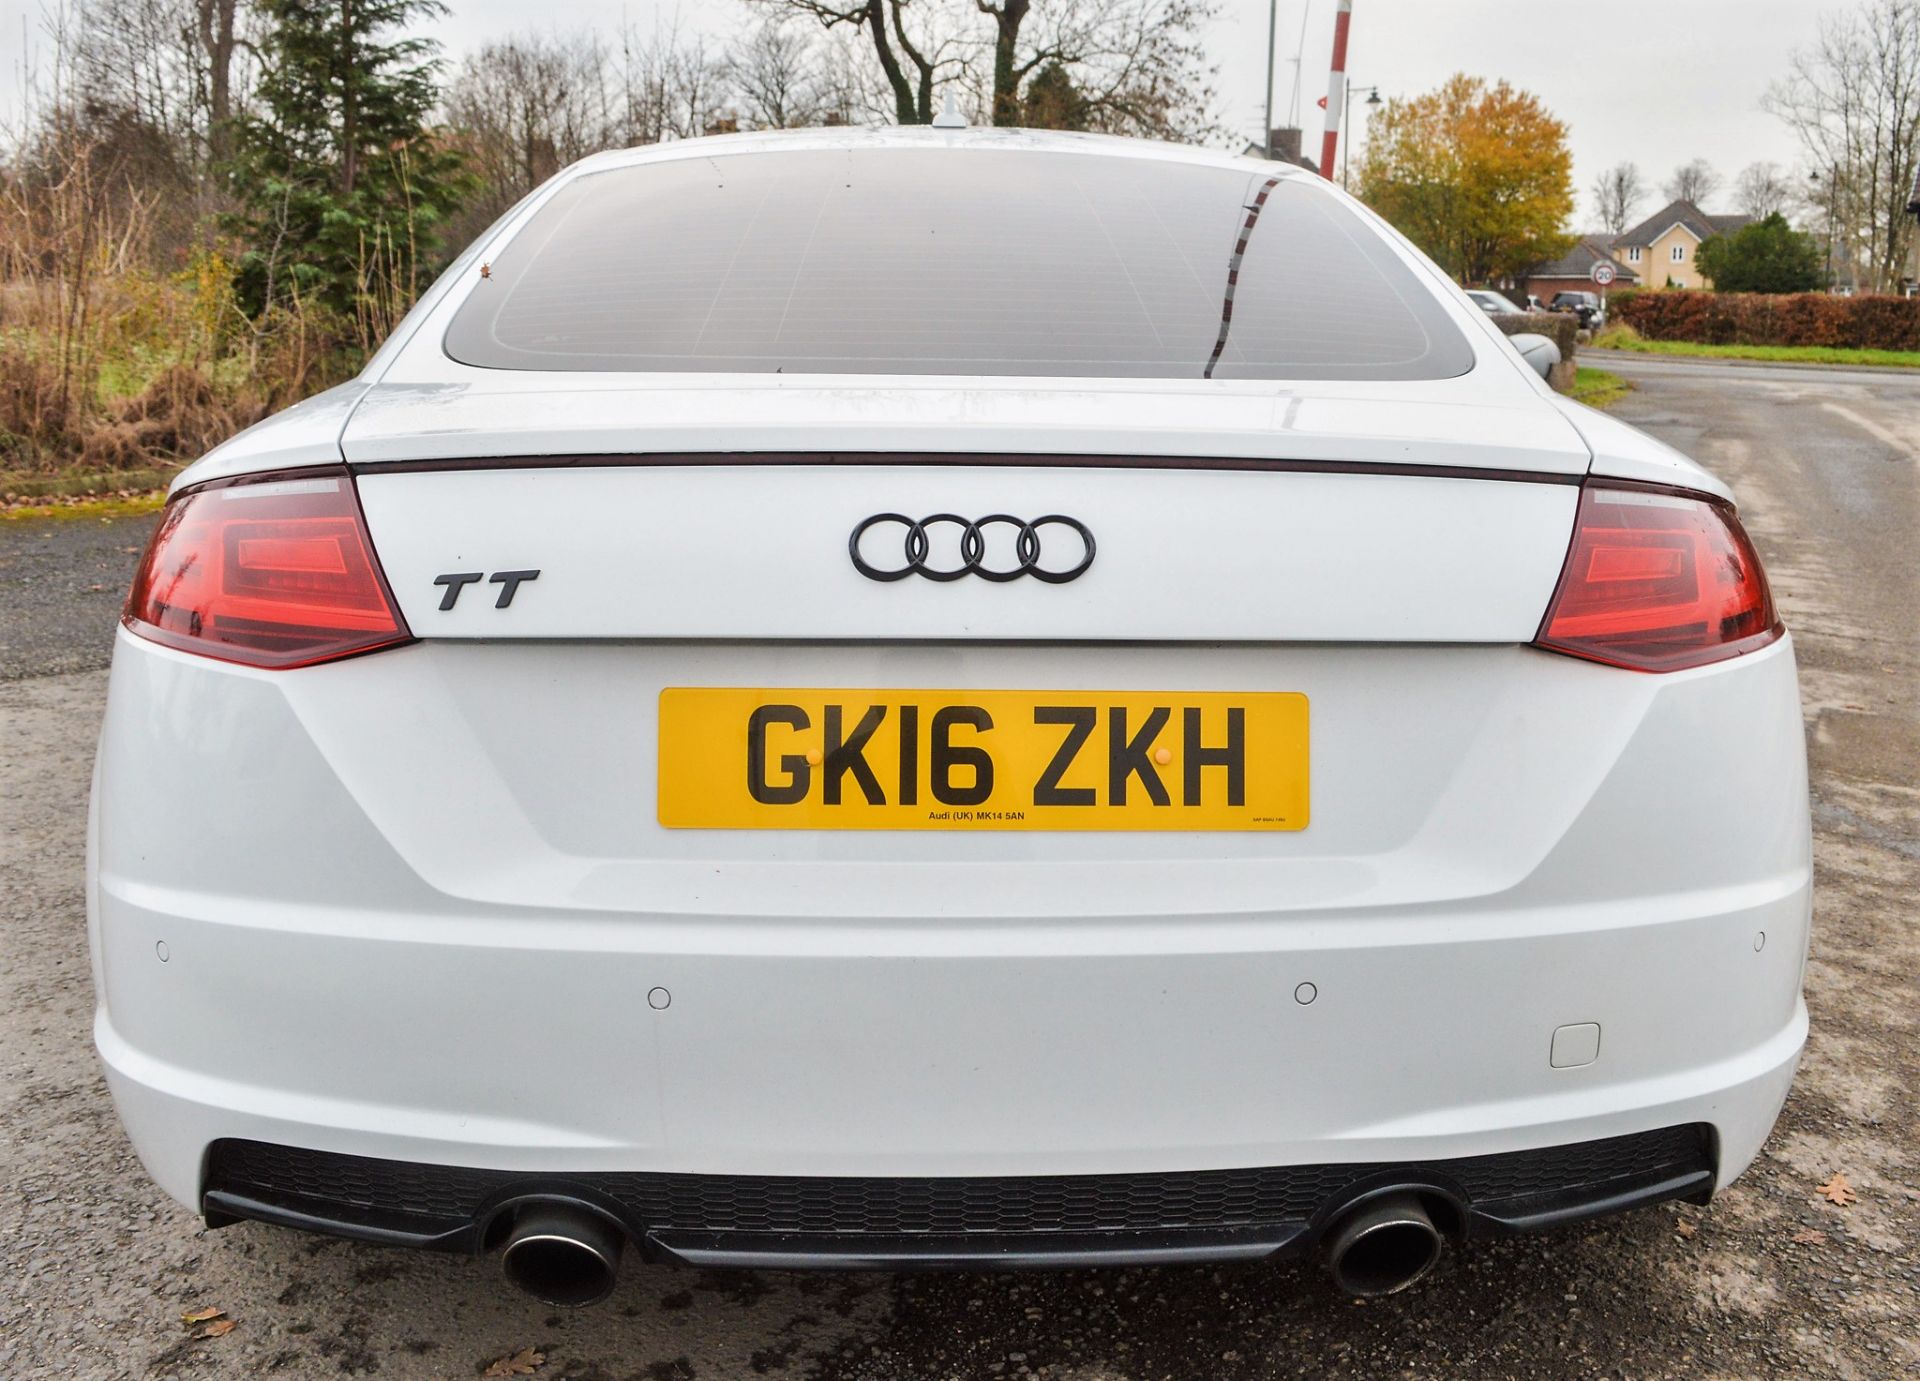 Audi TT TFSi Quattro S-Line 2 litre petrol automatic coupe car Registration Number: GK16 ZKH Date of - Image 6 of 10